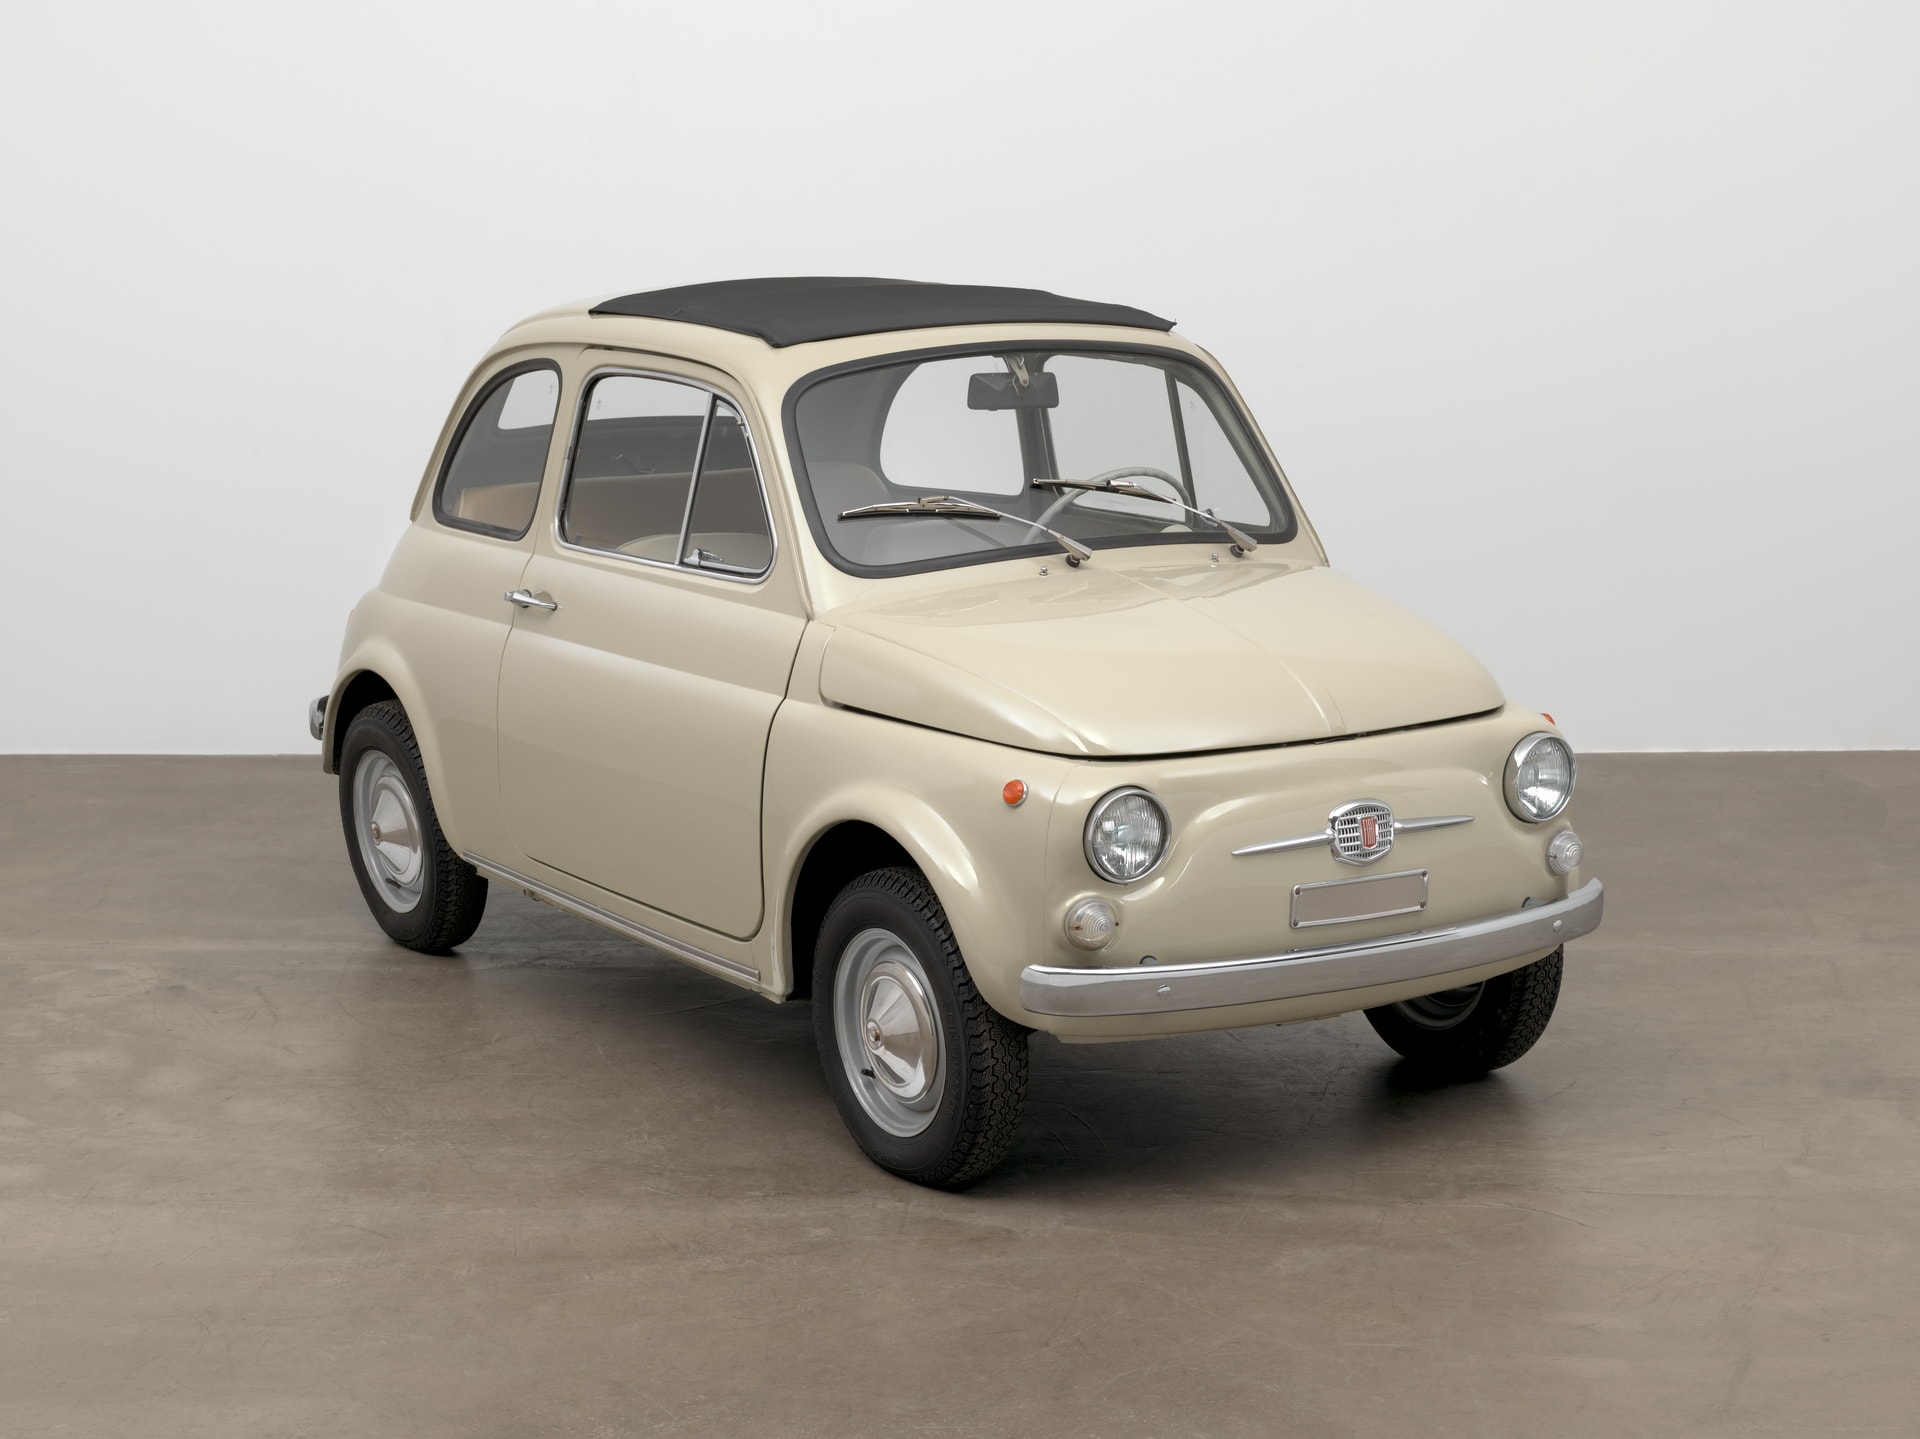 FIAT 500 F Series Gets Displayed at Museum of Modern Art